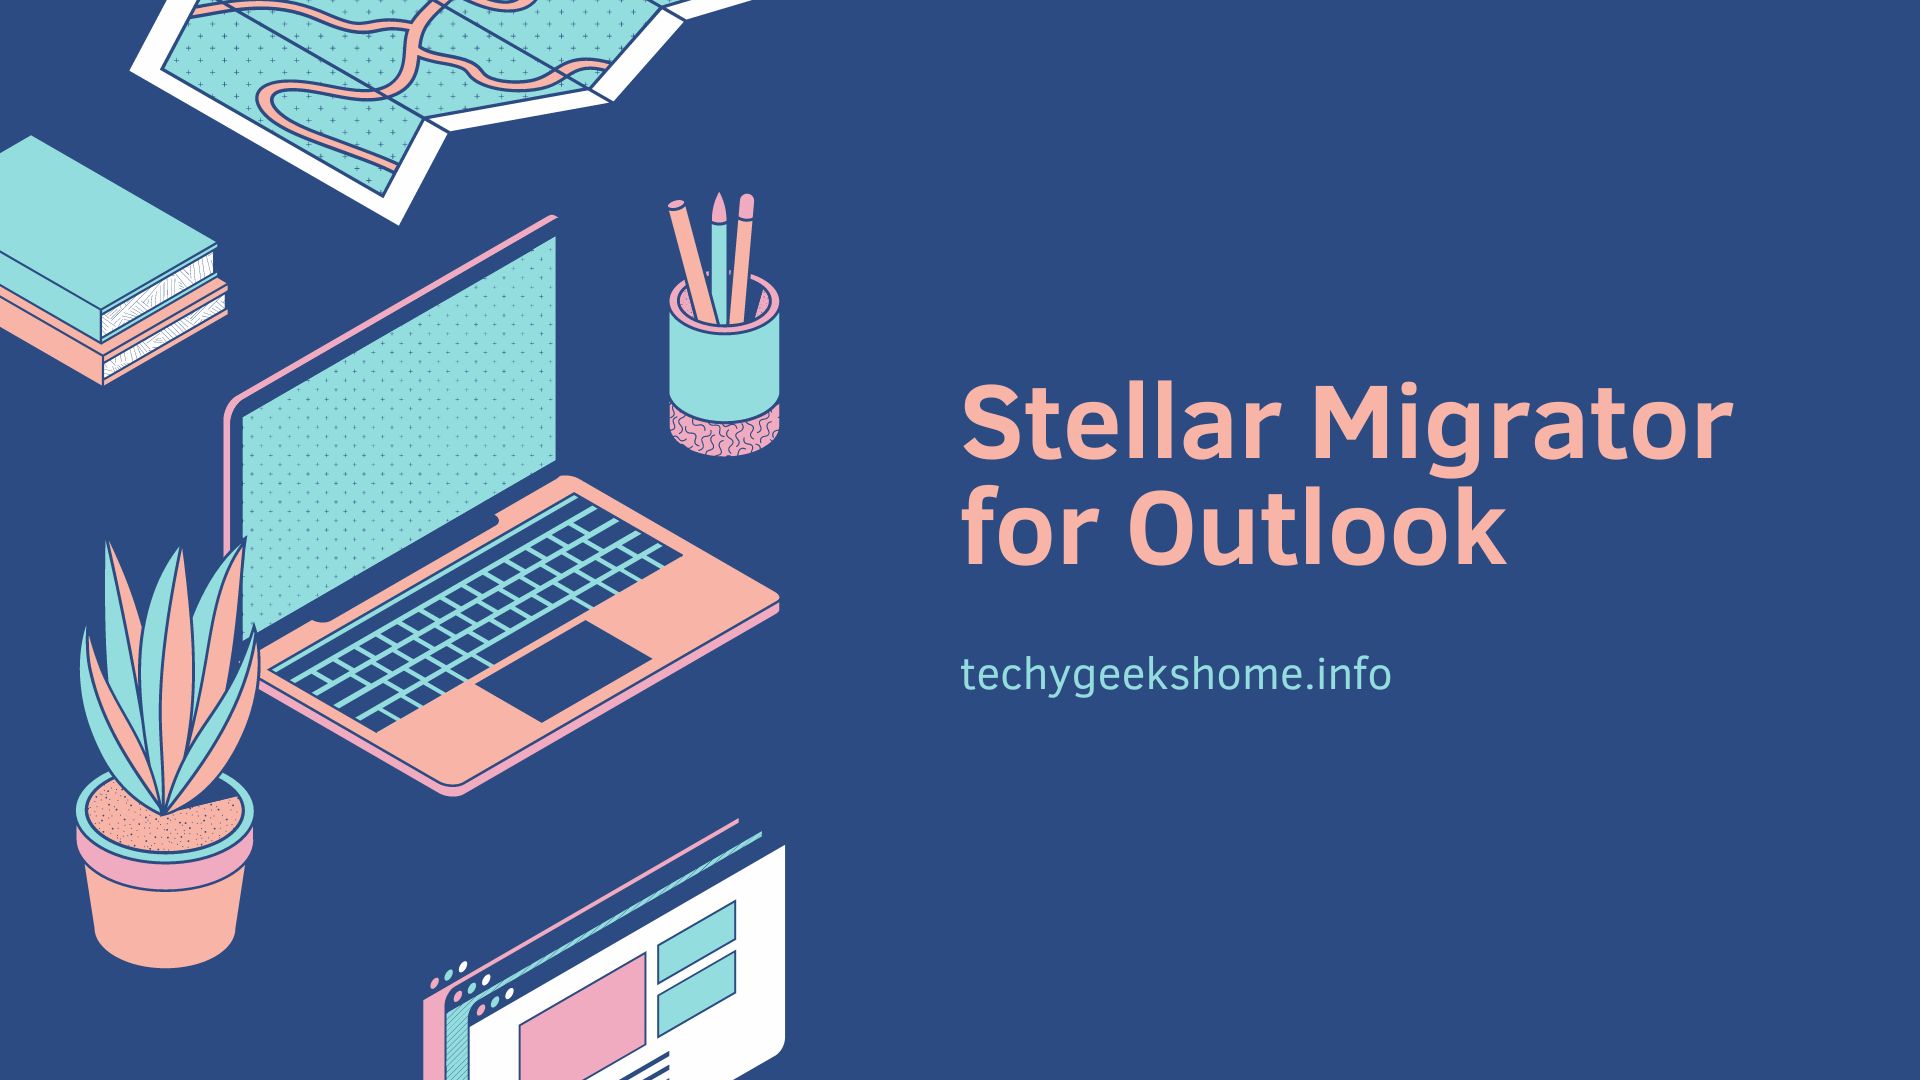 Stellar Migrator for Outlook – Migrate PST Files to Office 365 in a Few Clicks